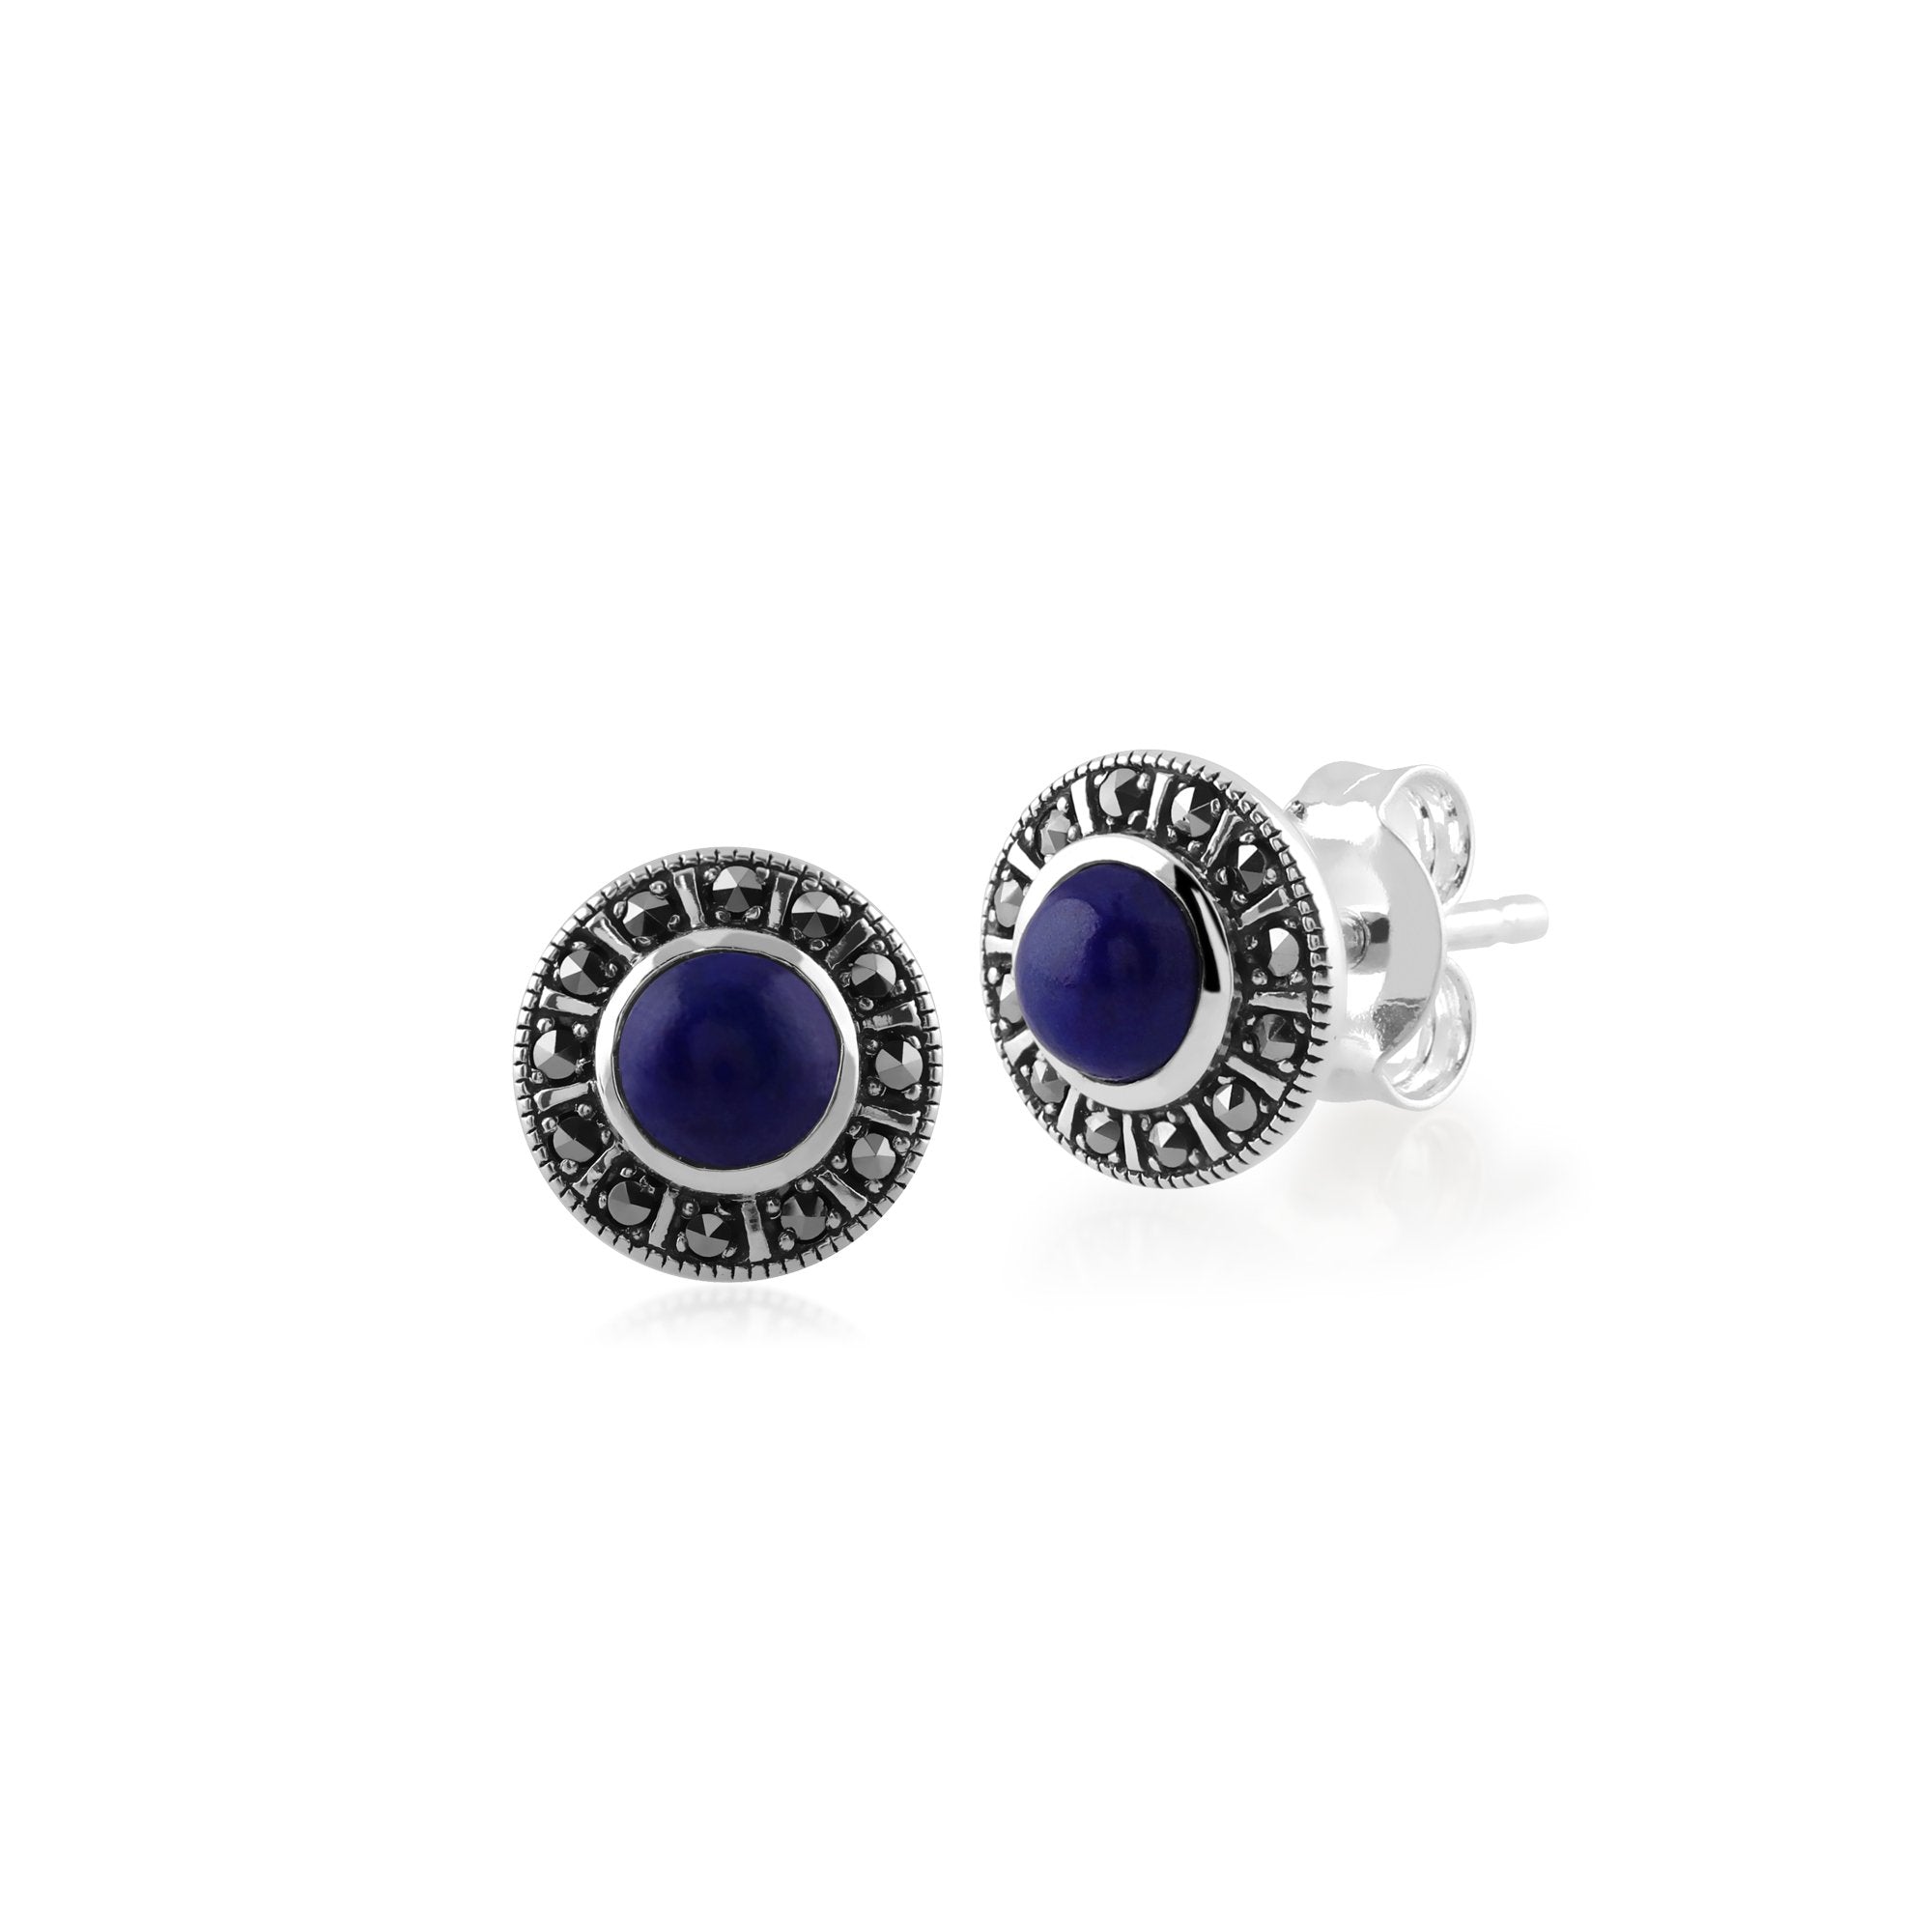 Art Deco Style Round Lapis Lazuli & Marcasite Halo Stud Earrings in 925 Sterling Silver